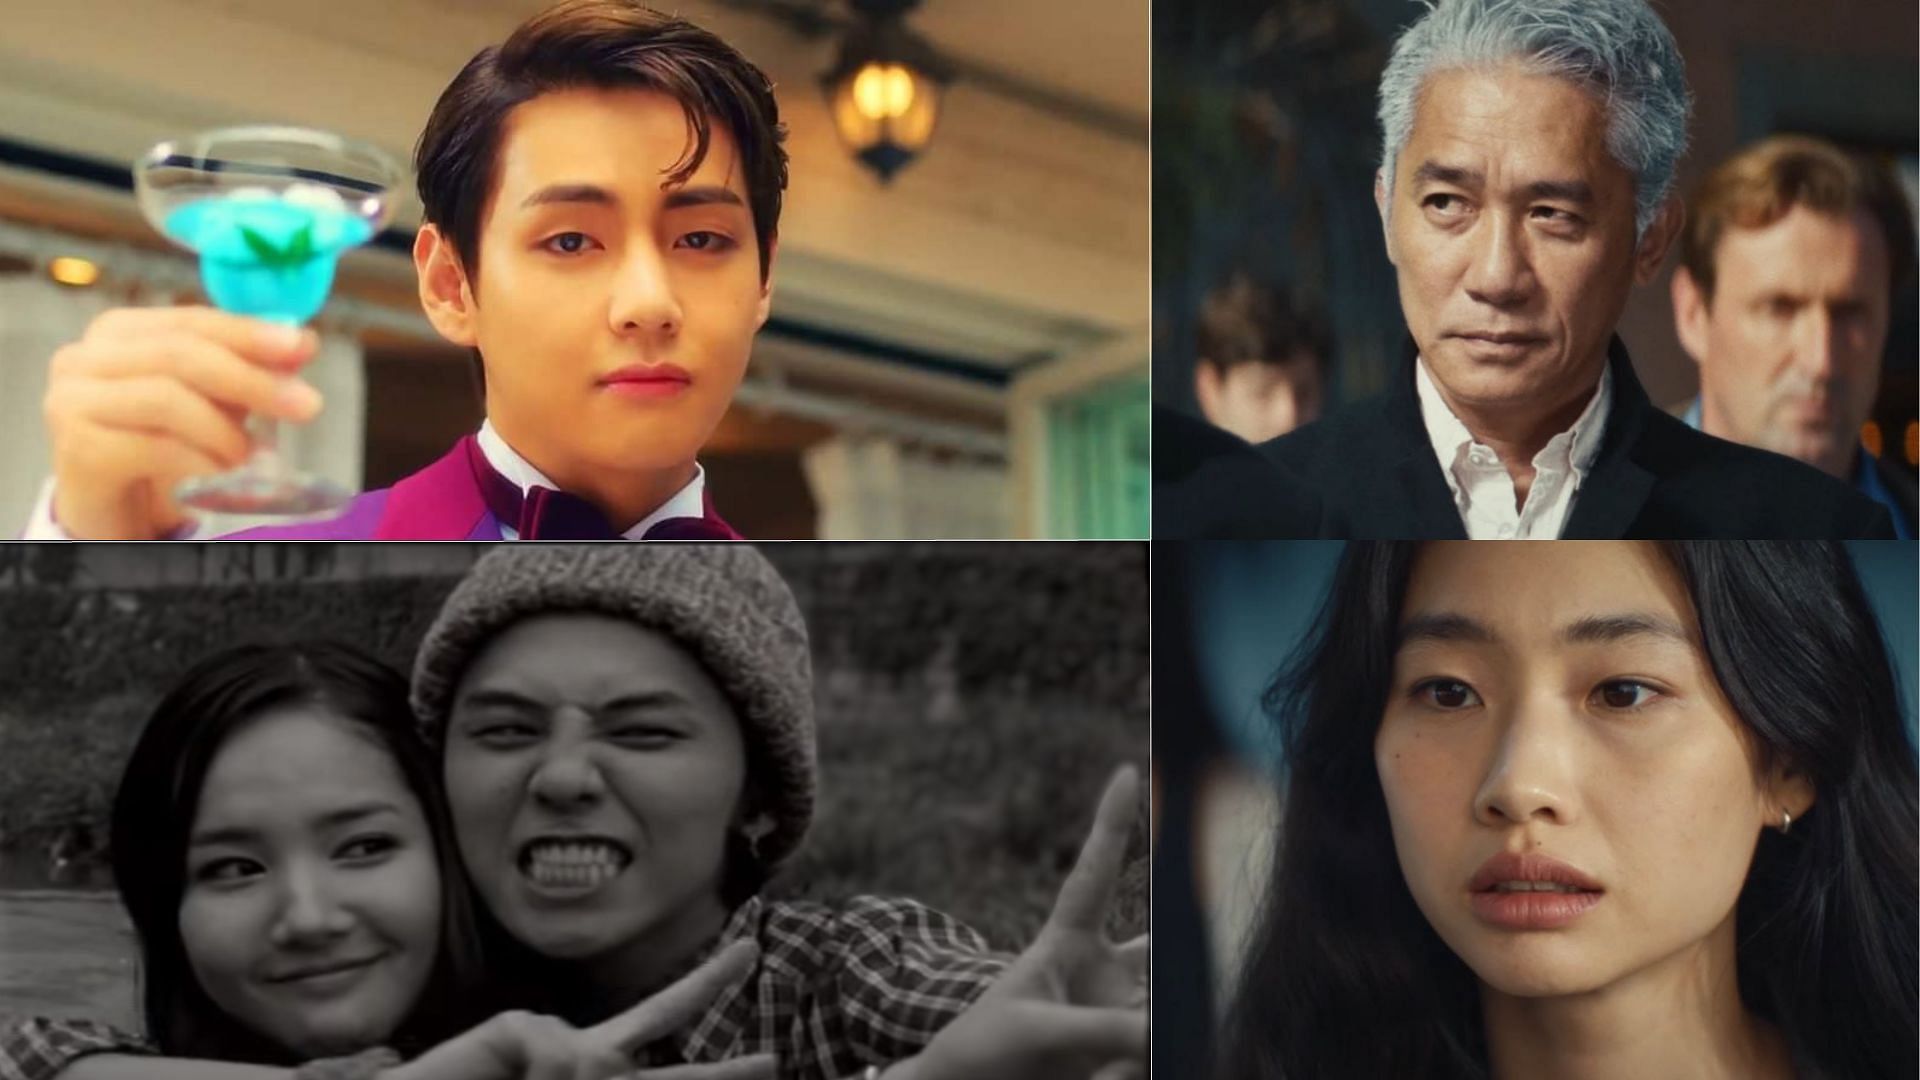 Global stars have made cameos on many K-pop music videos.